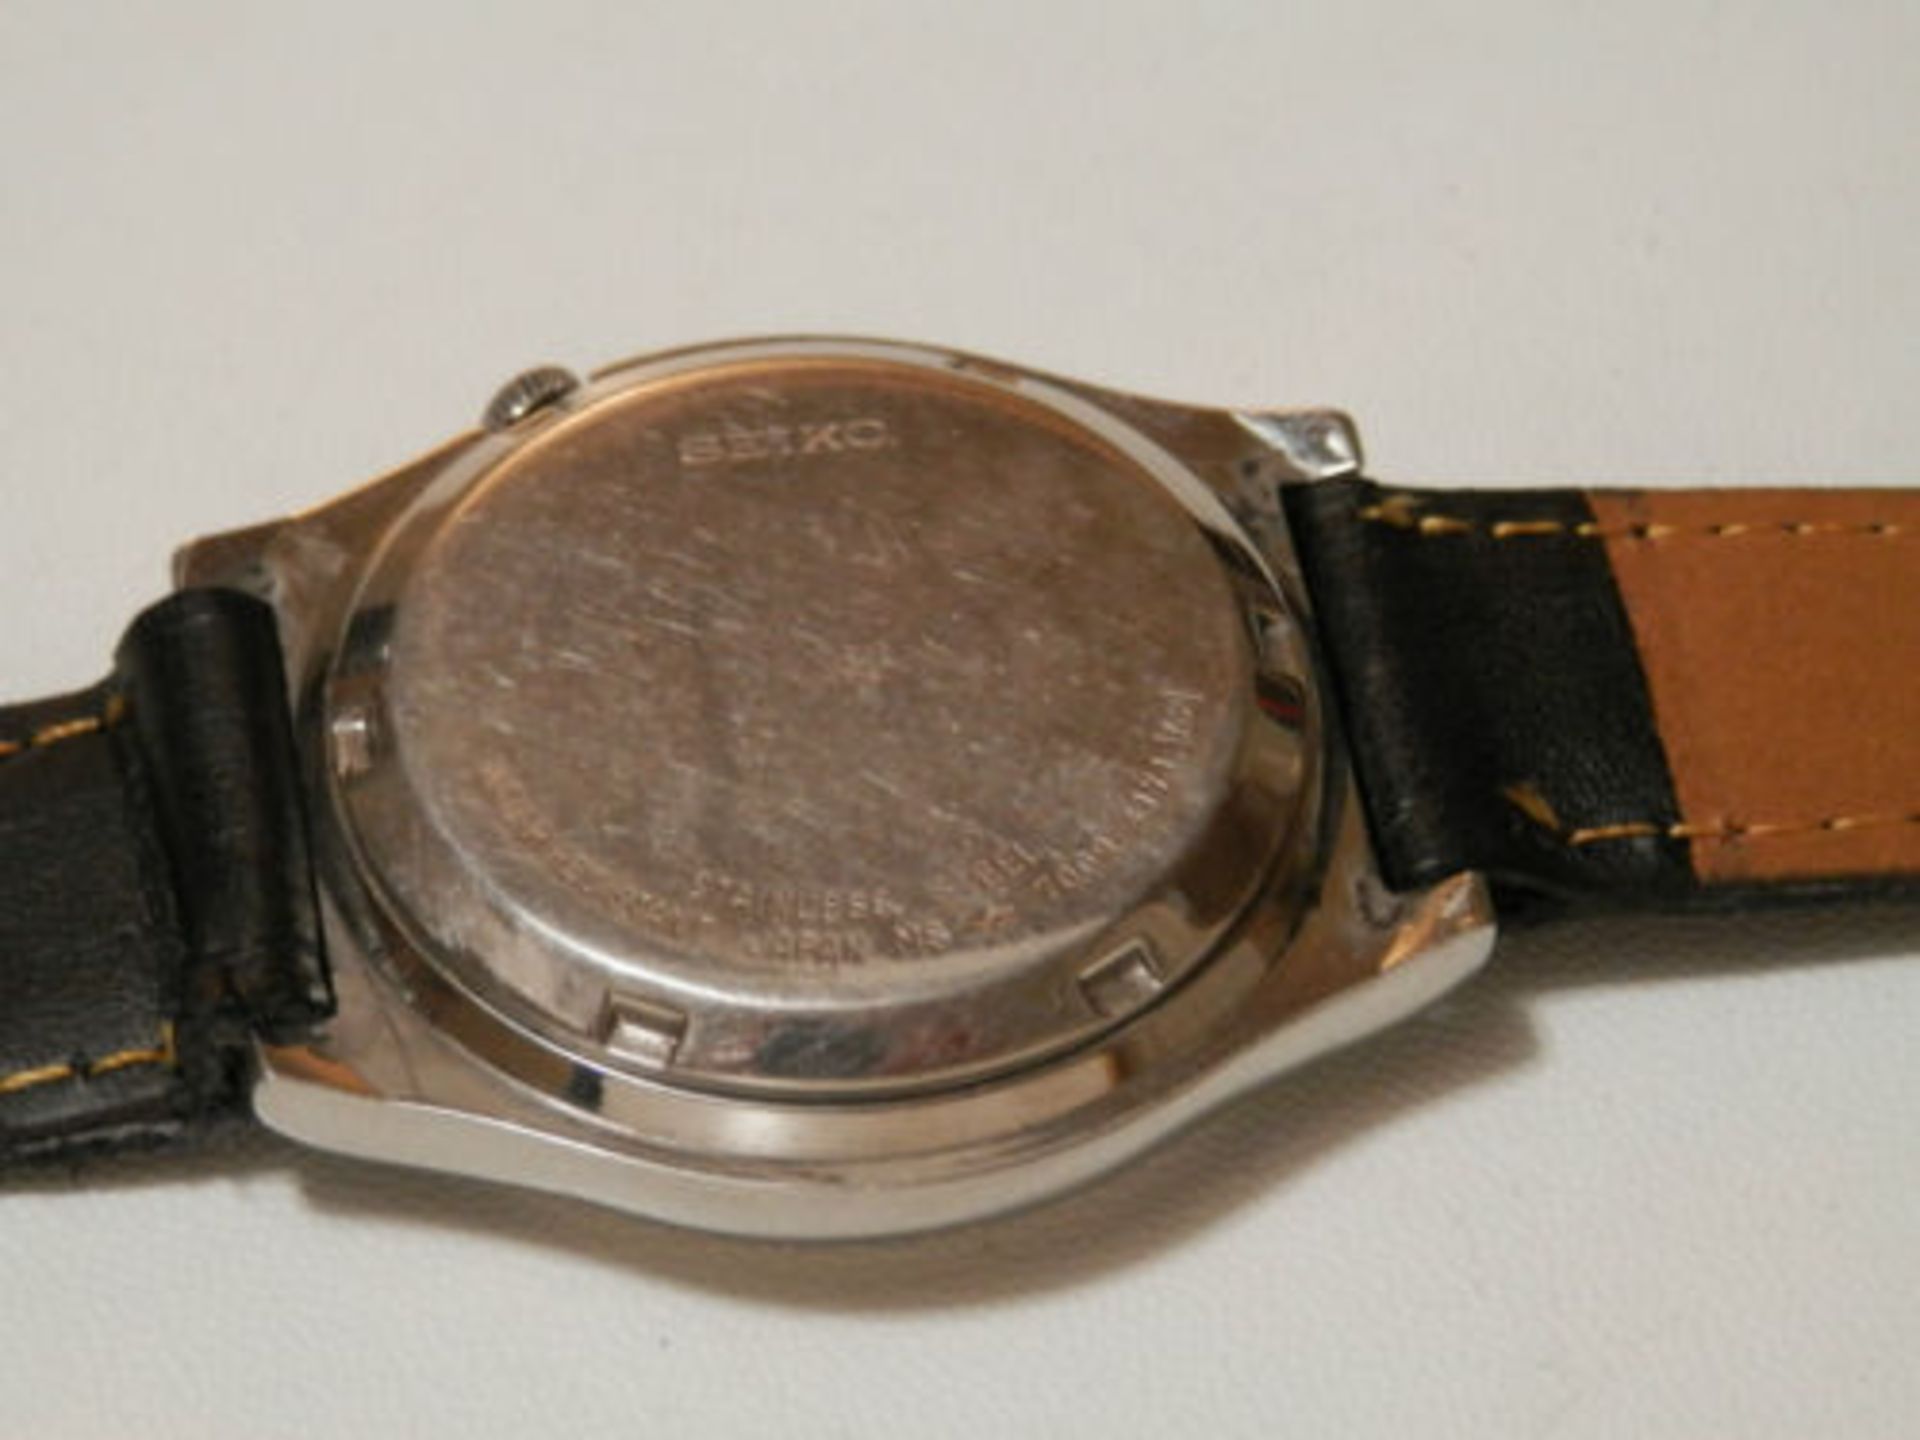 1984 WORKING SEIKO 7009 AUTOMATIC 17 JEWEL DAY/DATE WATCH, STAINLESS CASE. - Image 12 of 13